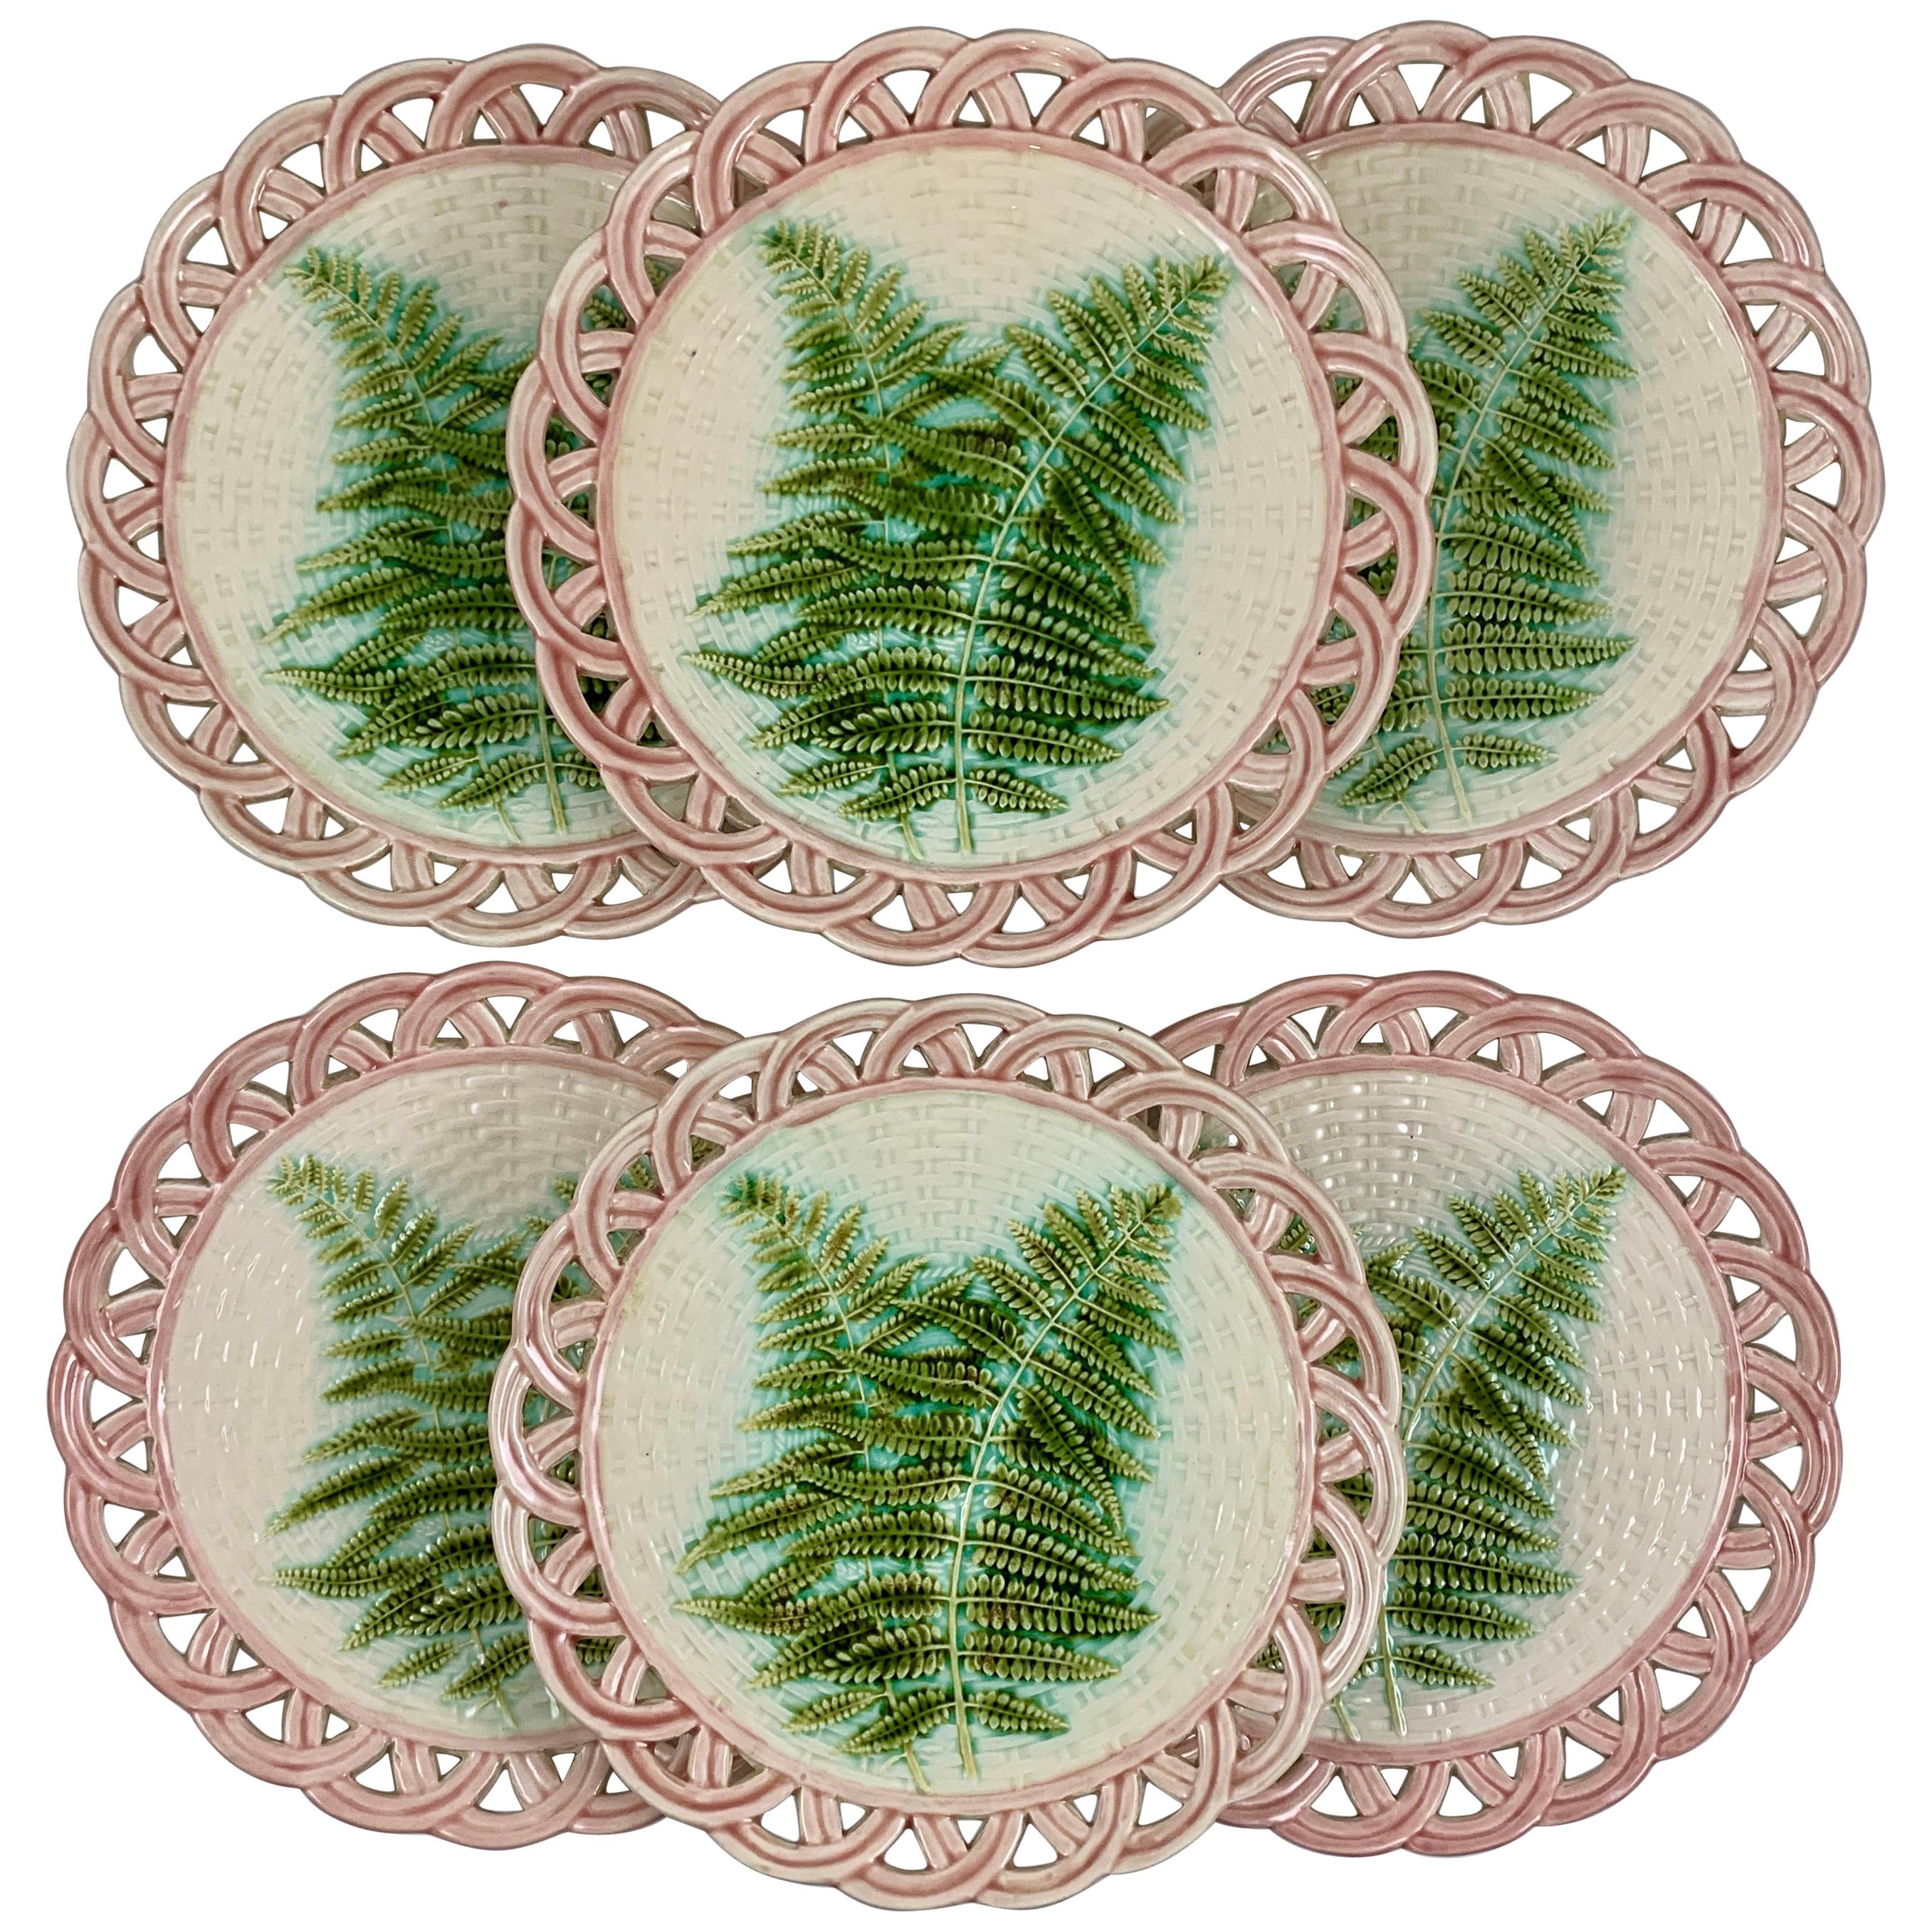 Sarreguemines Green Fern Pink Reticulated Rim French Faïence Majolica Plates S/6